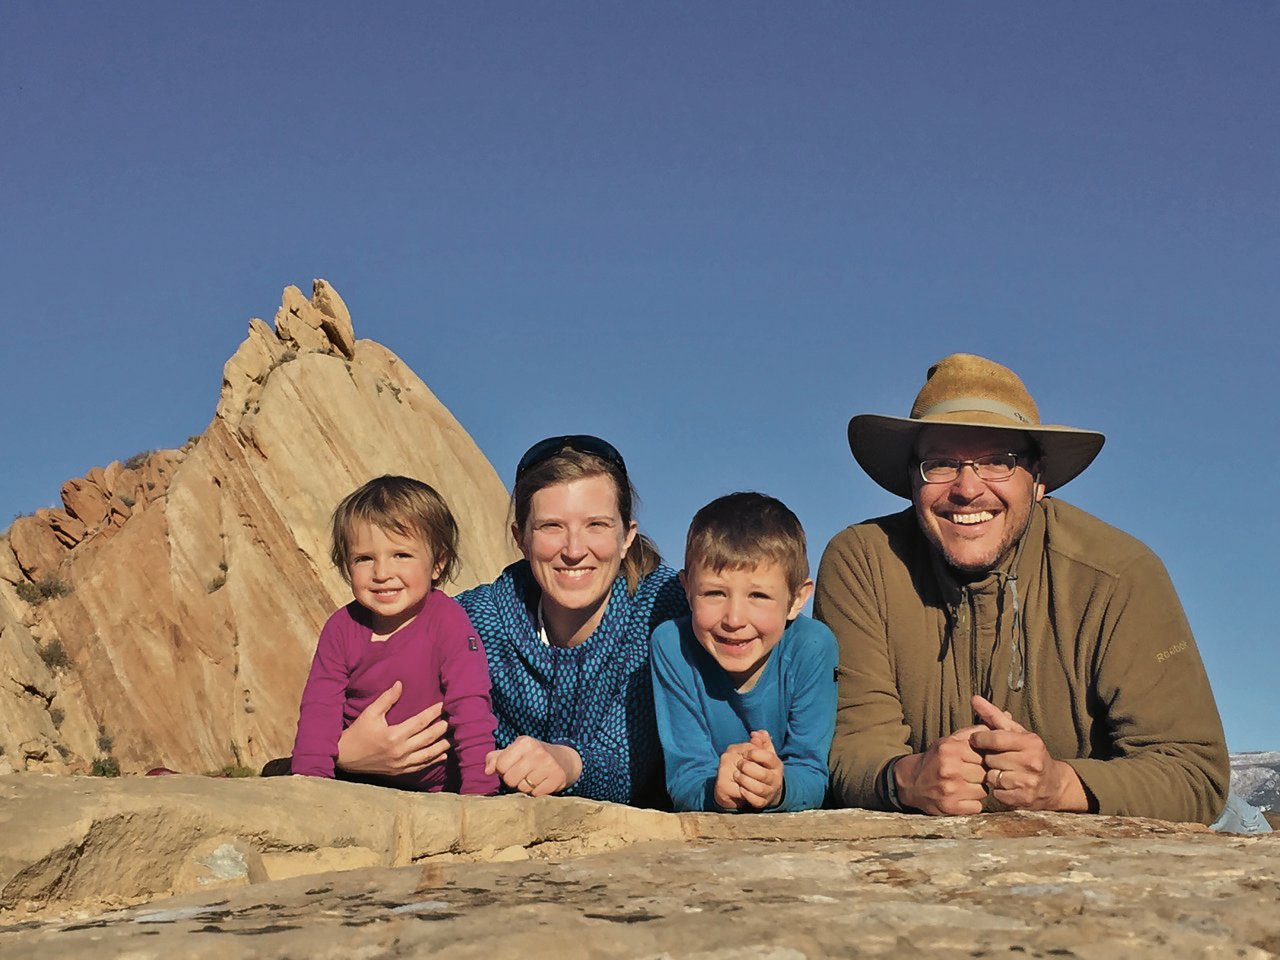 Marcio and his family smile with desert rocks in the background